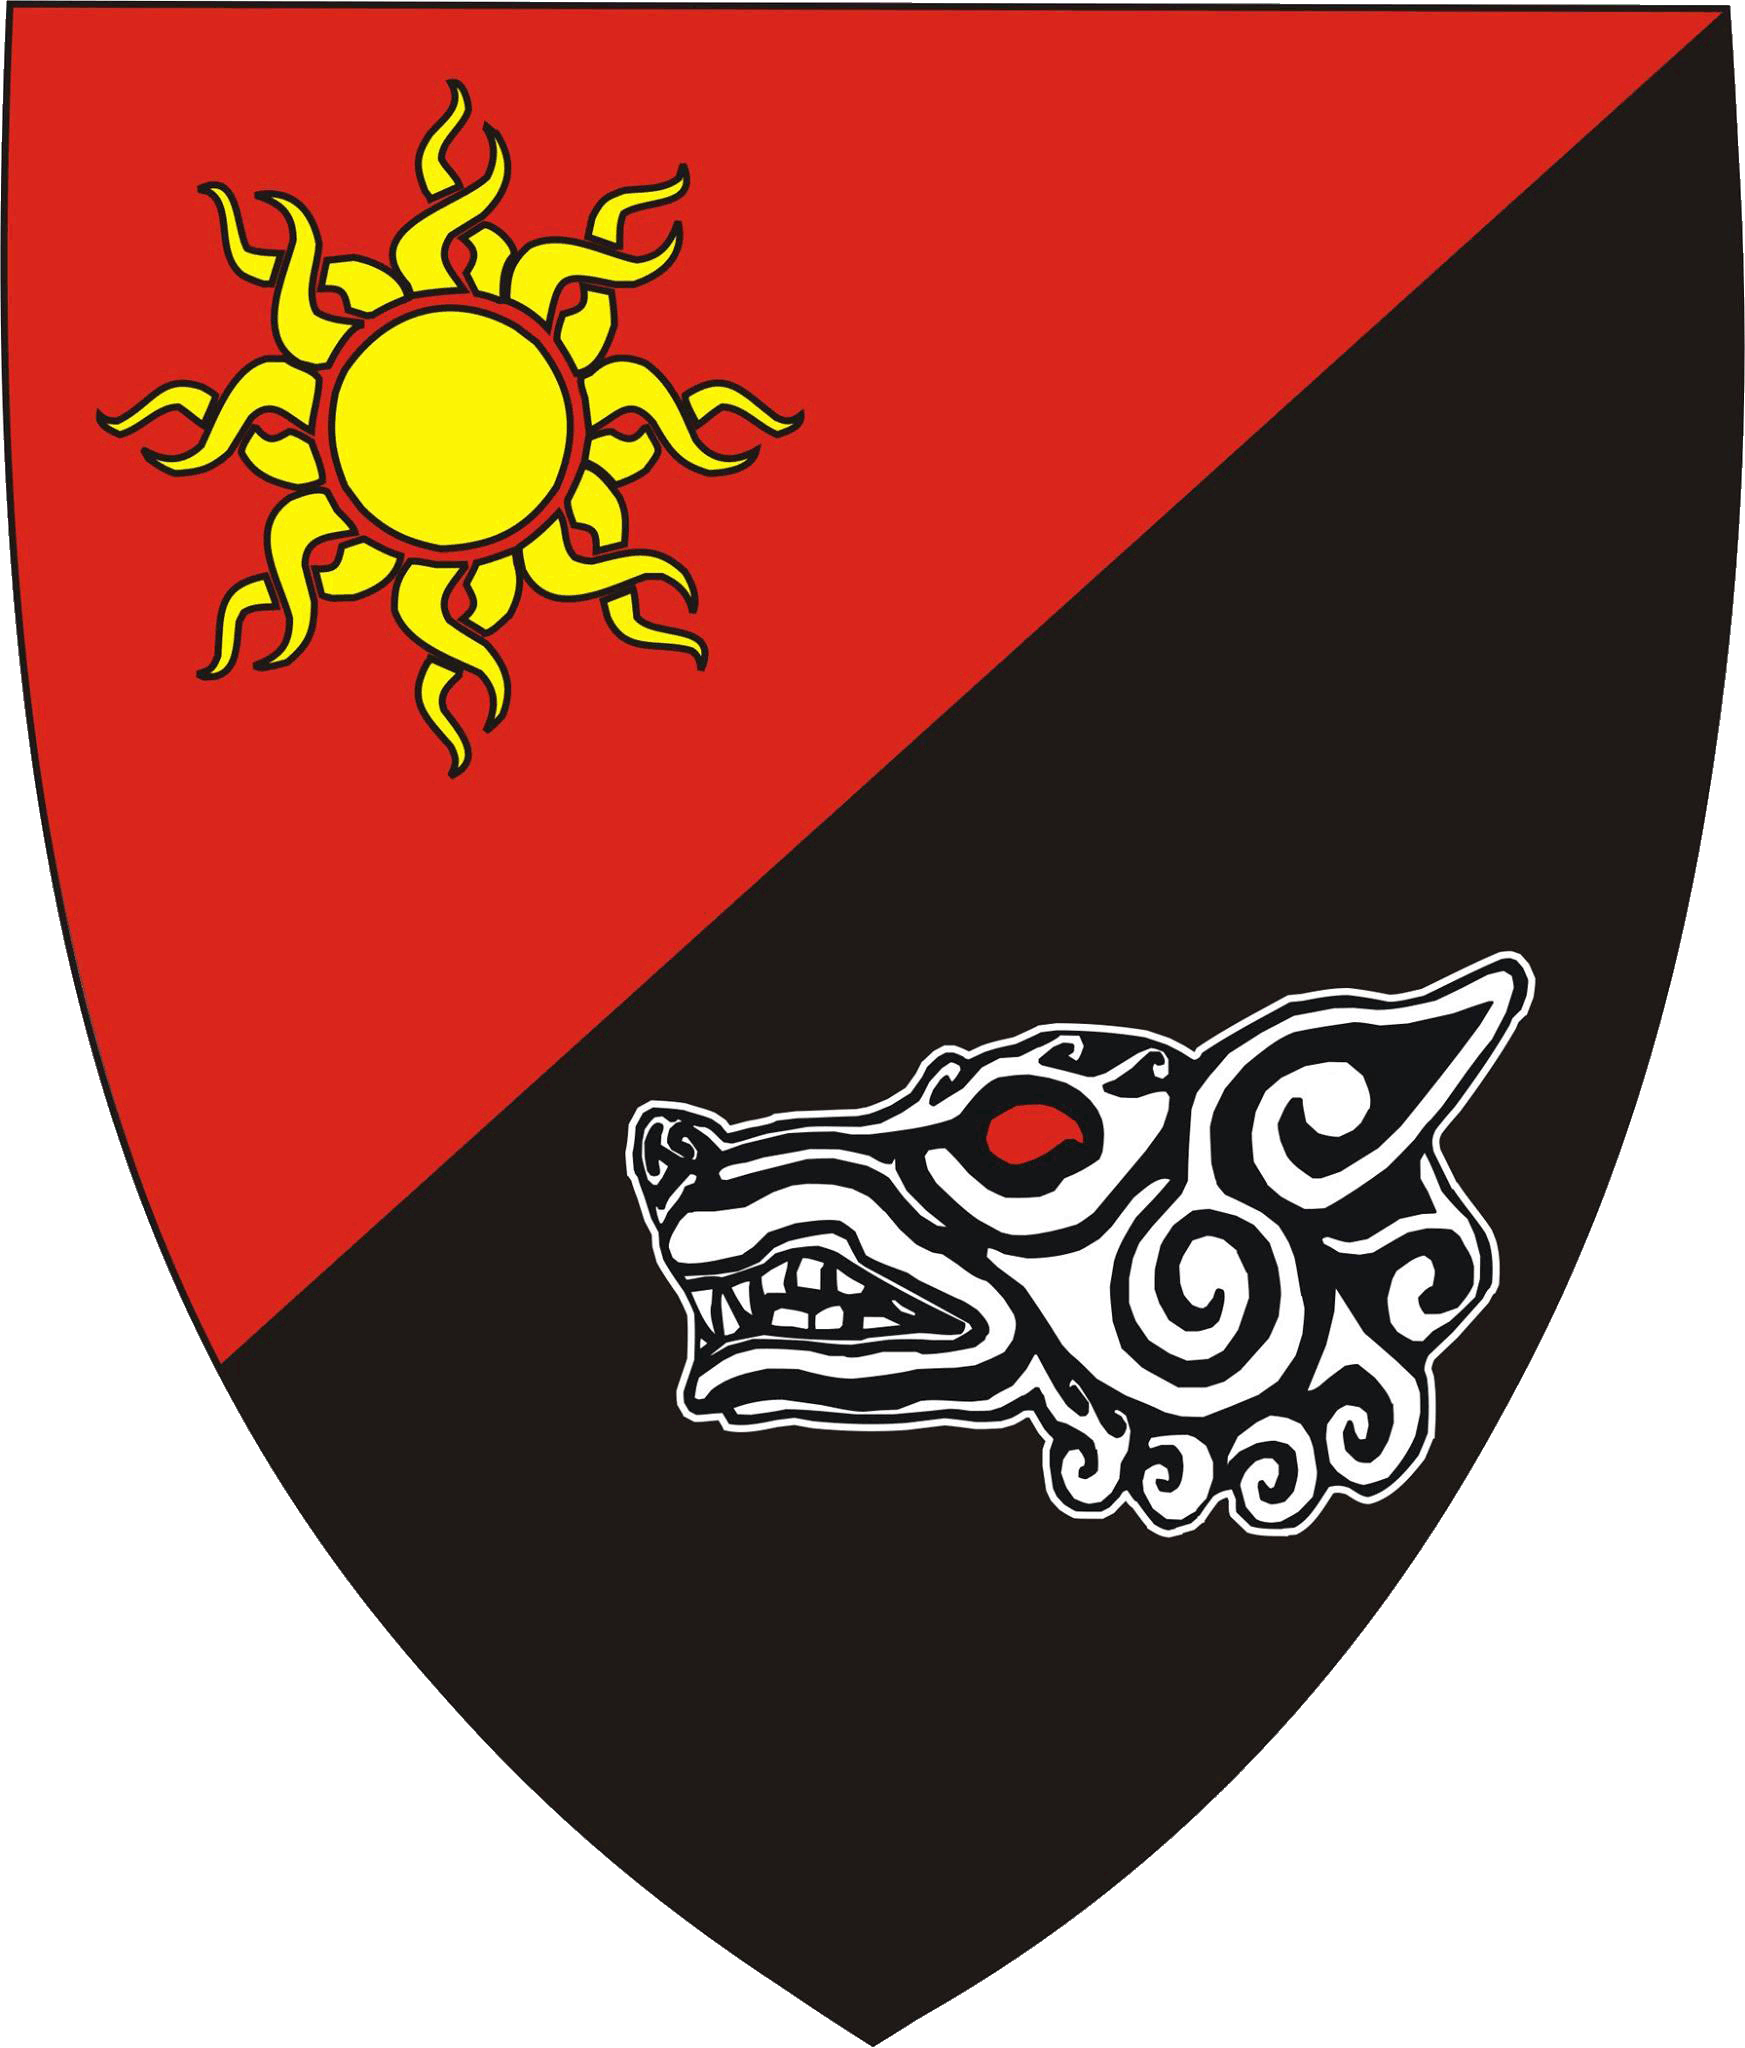 Per bend sinister gules and sable, a sun in its splendor Or and a wolf's head erased argent.